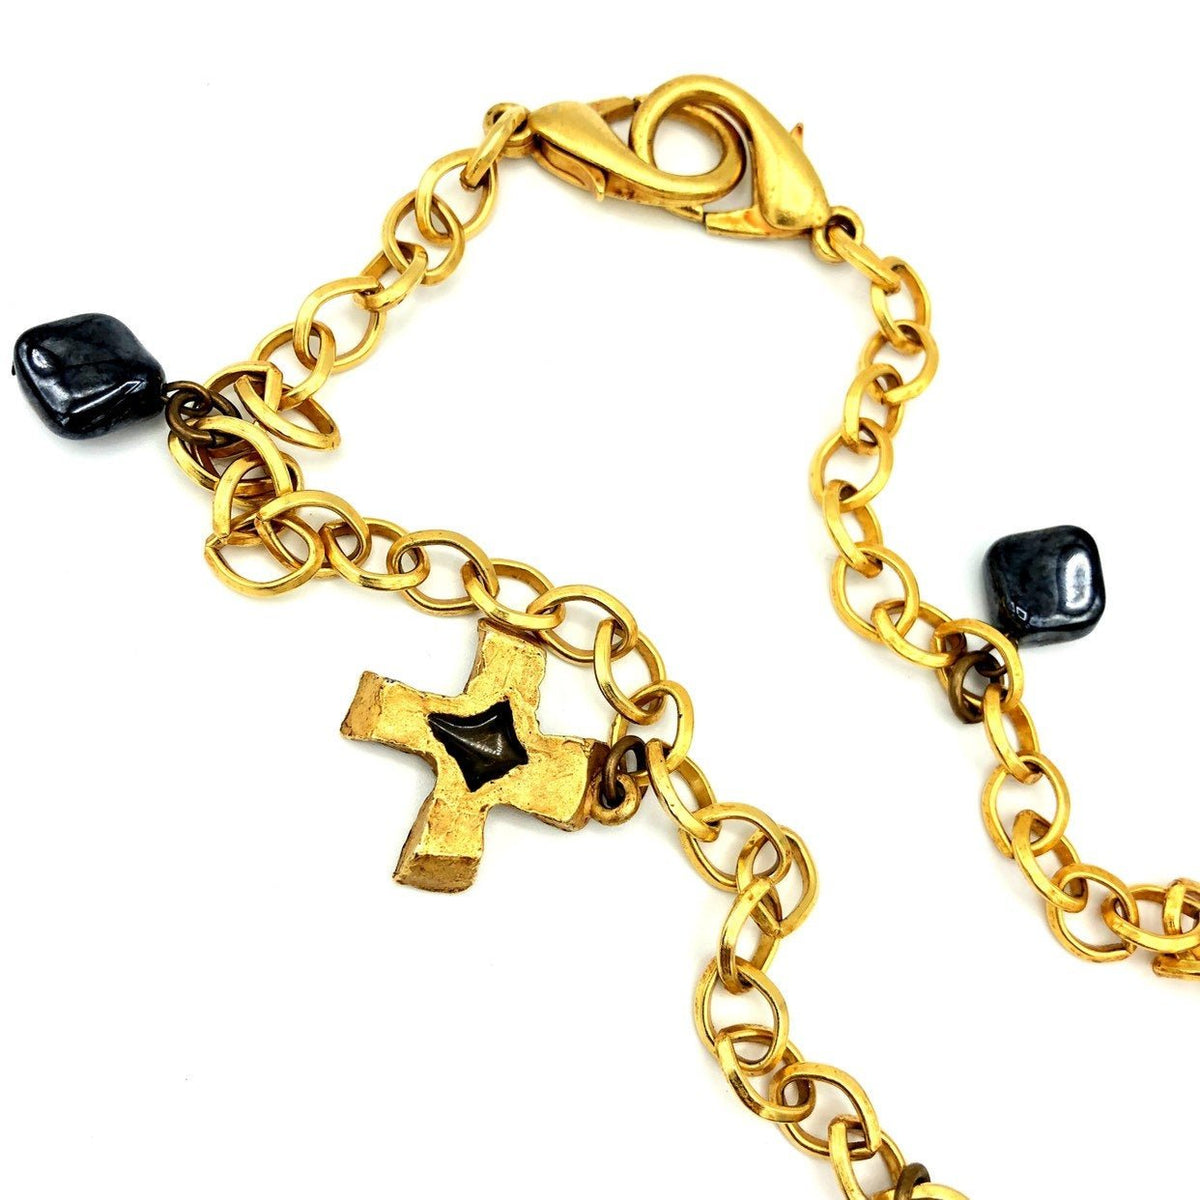 Kate Hines Gold Enamel Cross Charm Vintage Necklace Belt - 24 Wishes Vintage Jewelry